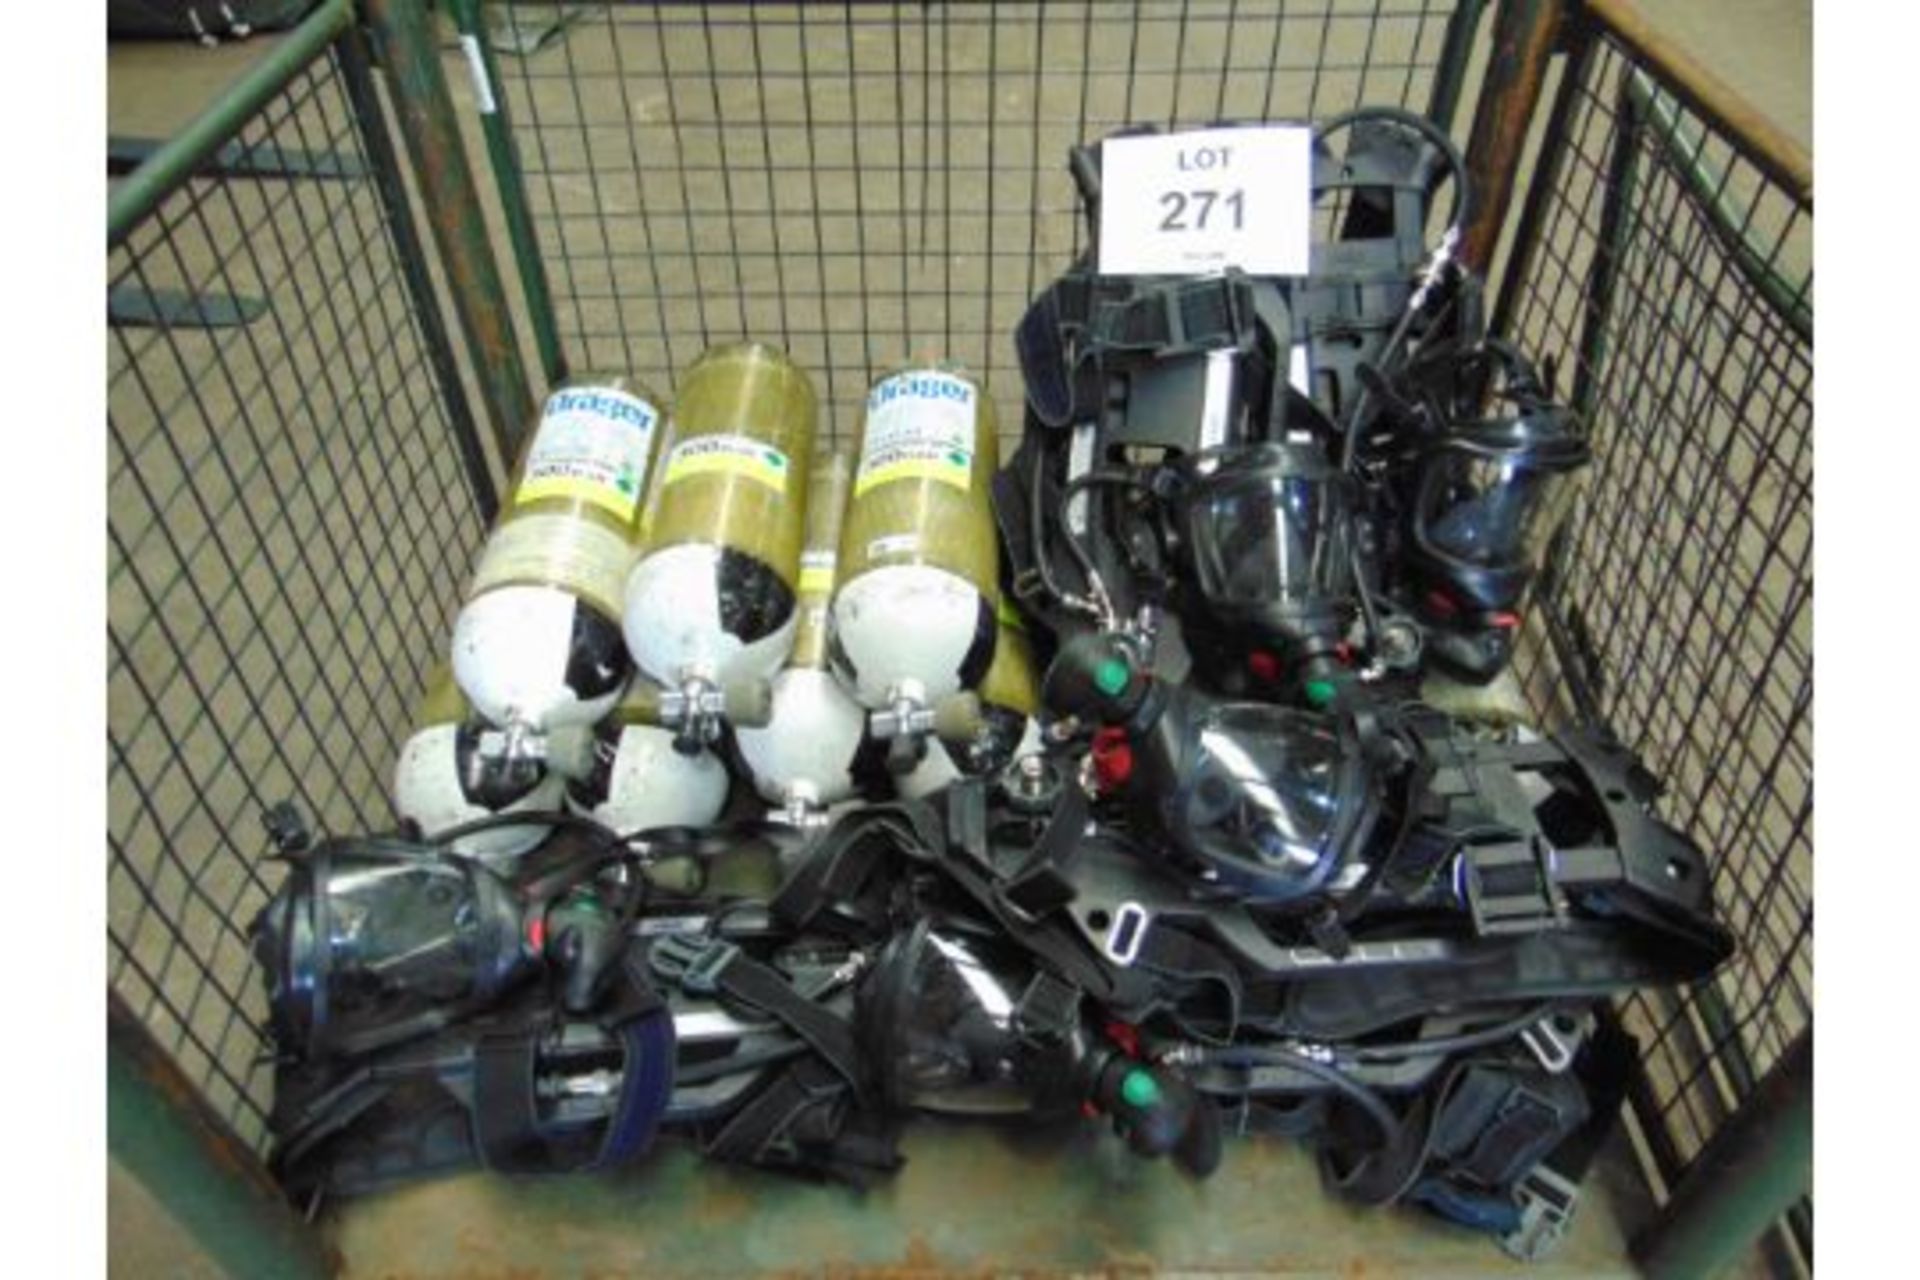 5 x Drager PSS 7000 Self Contained Breathing Apparatus w/ 10 x Drager 300 Bar Air Cylinders - Image 15 of 20